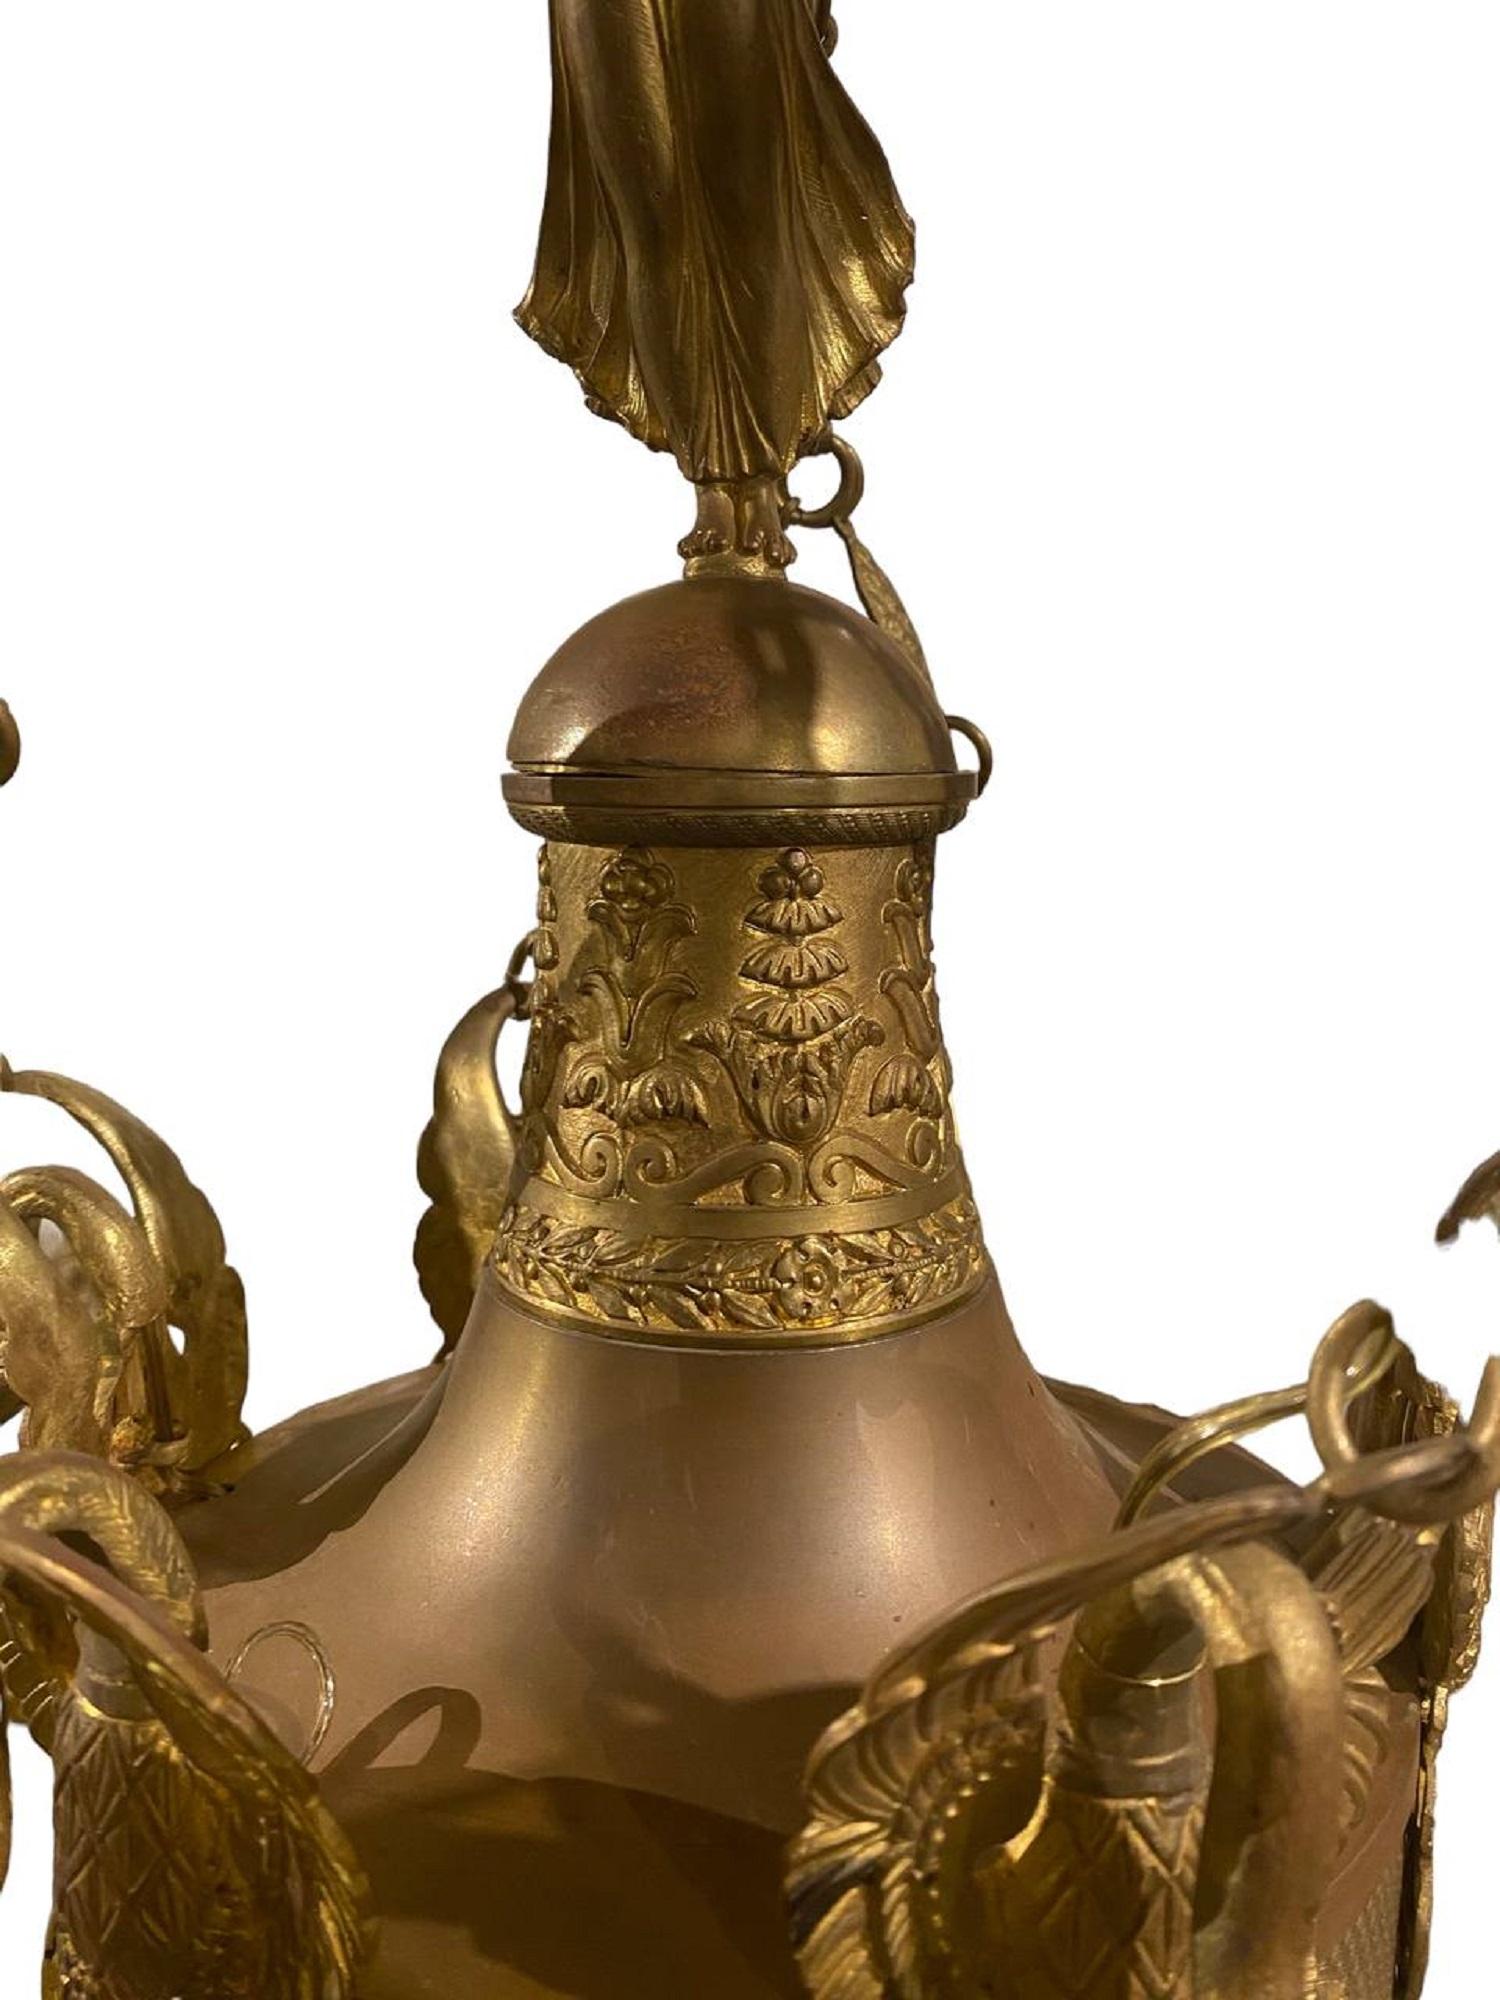 A mid to late 19th century French gilt bronze Empire chandelier with swans heads and bronze figurine atop